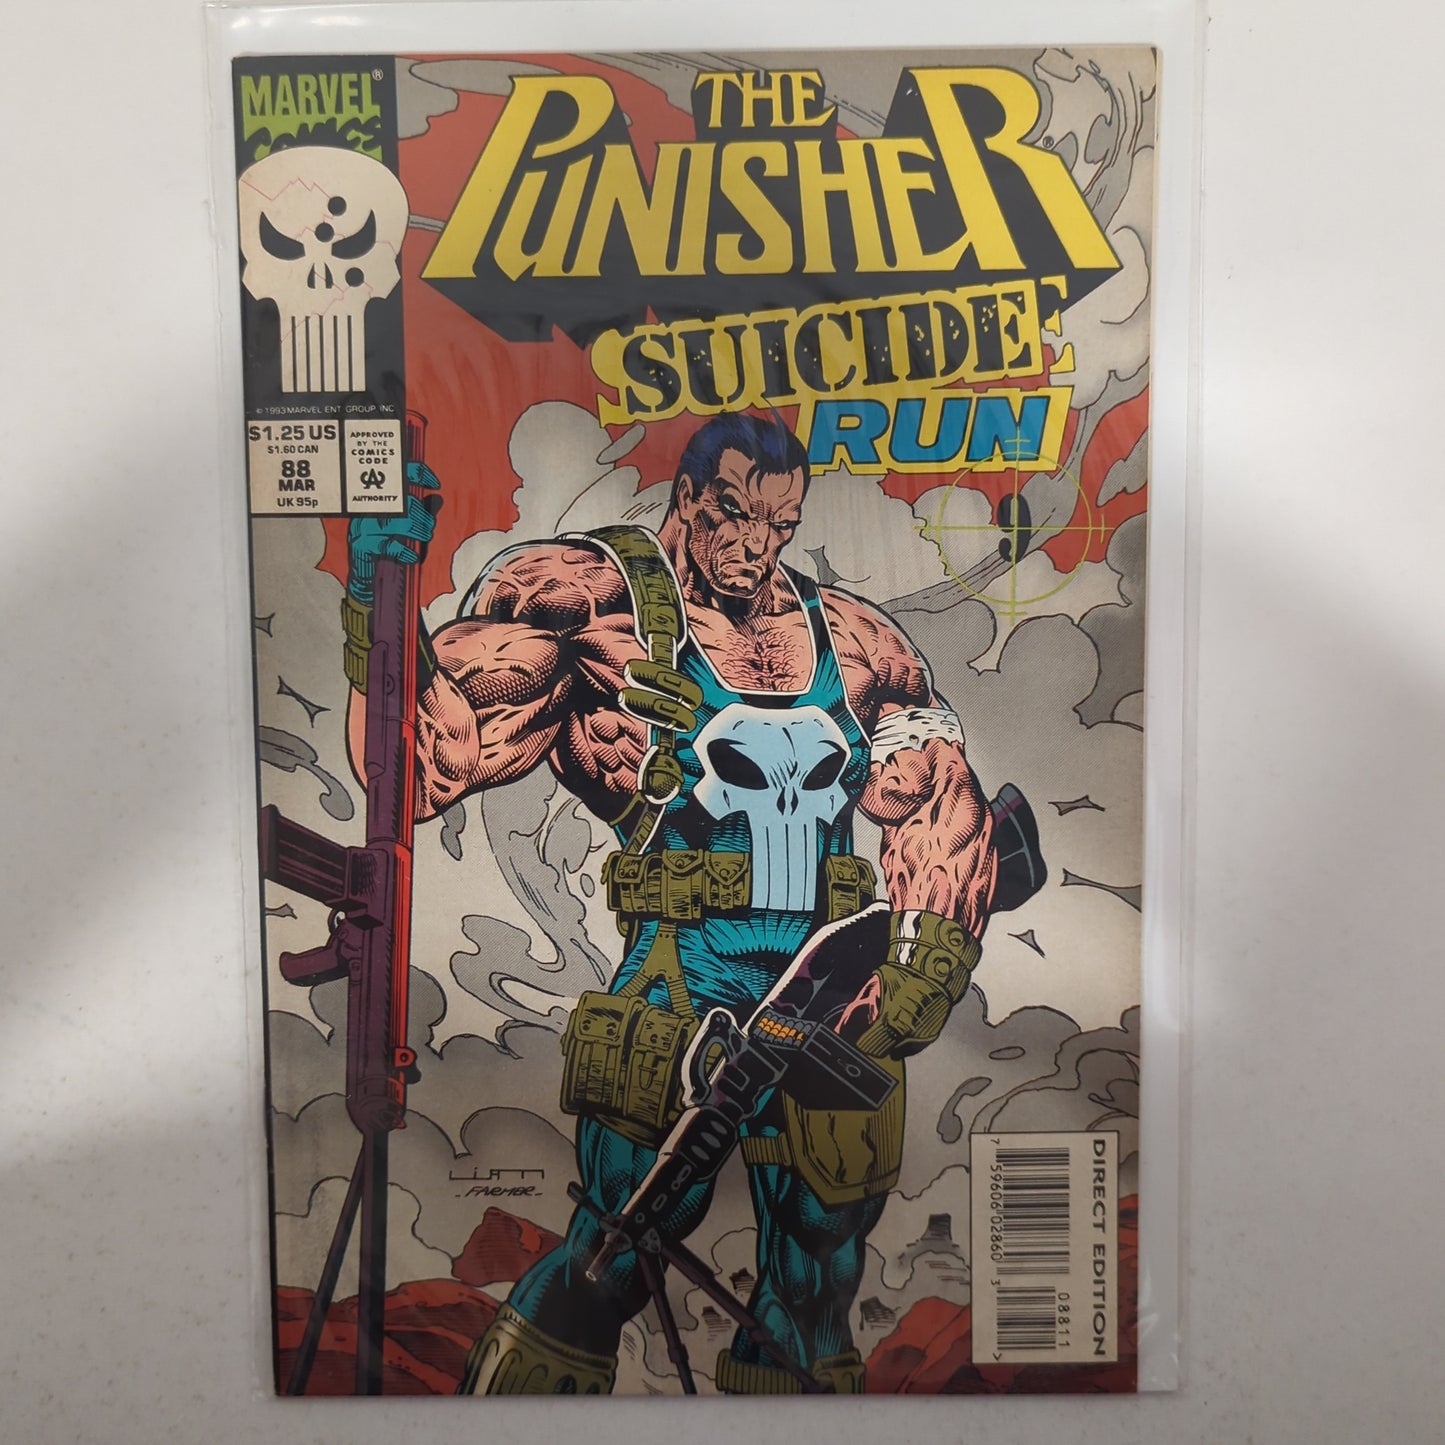 The Punisher #88